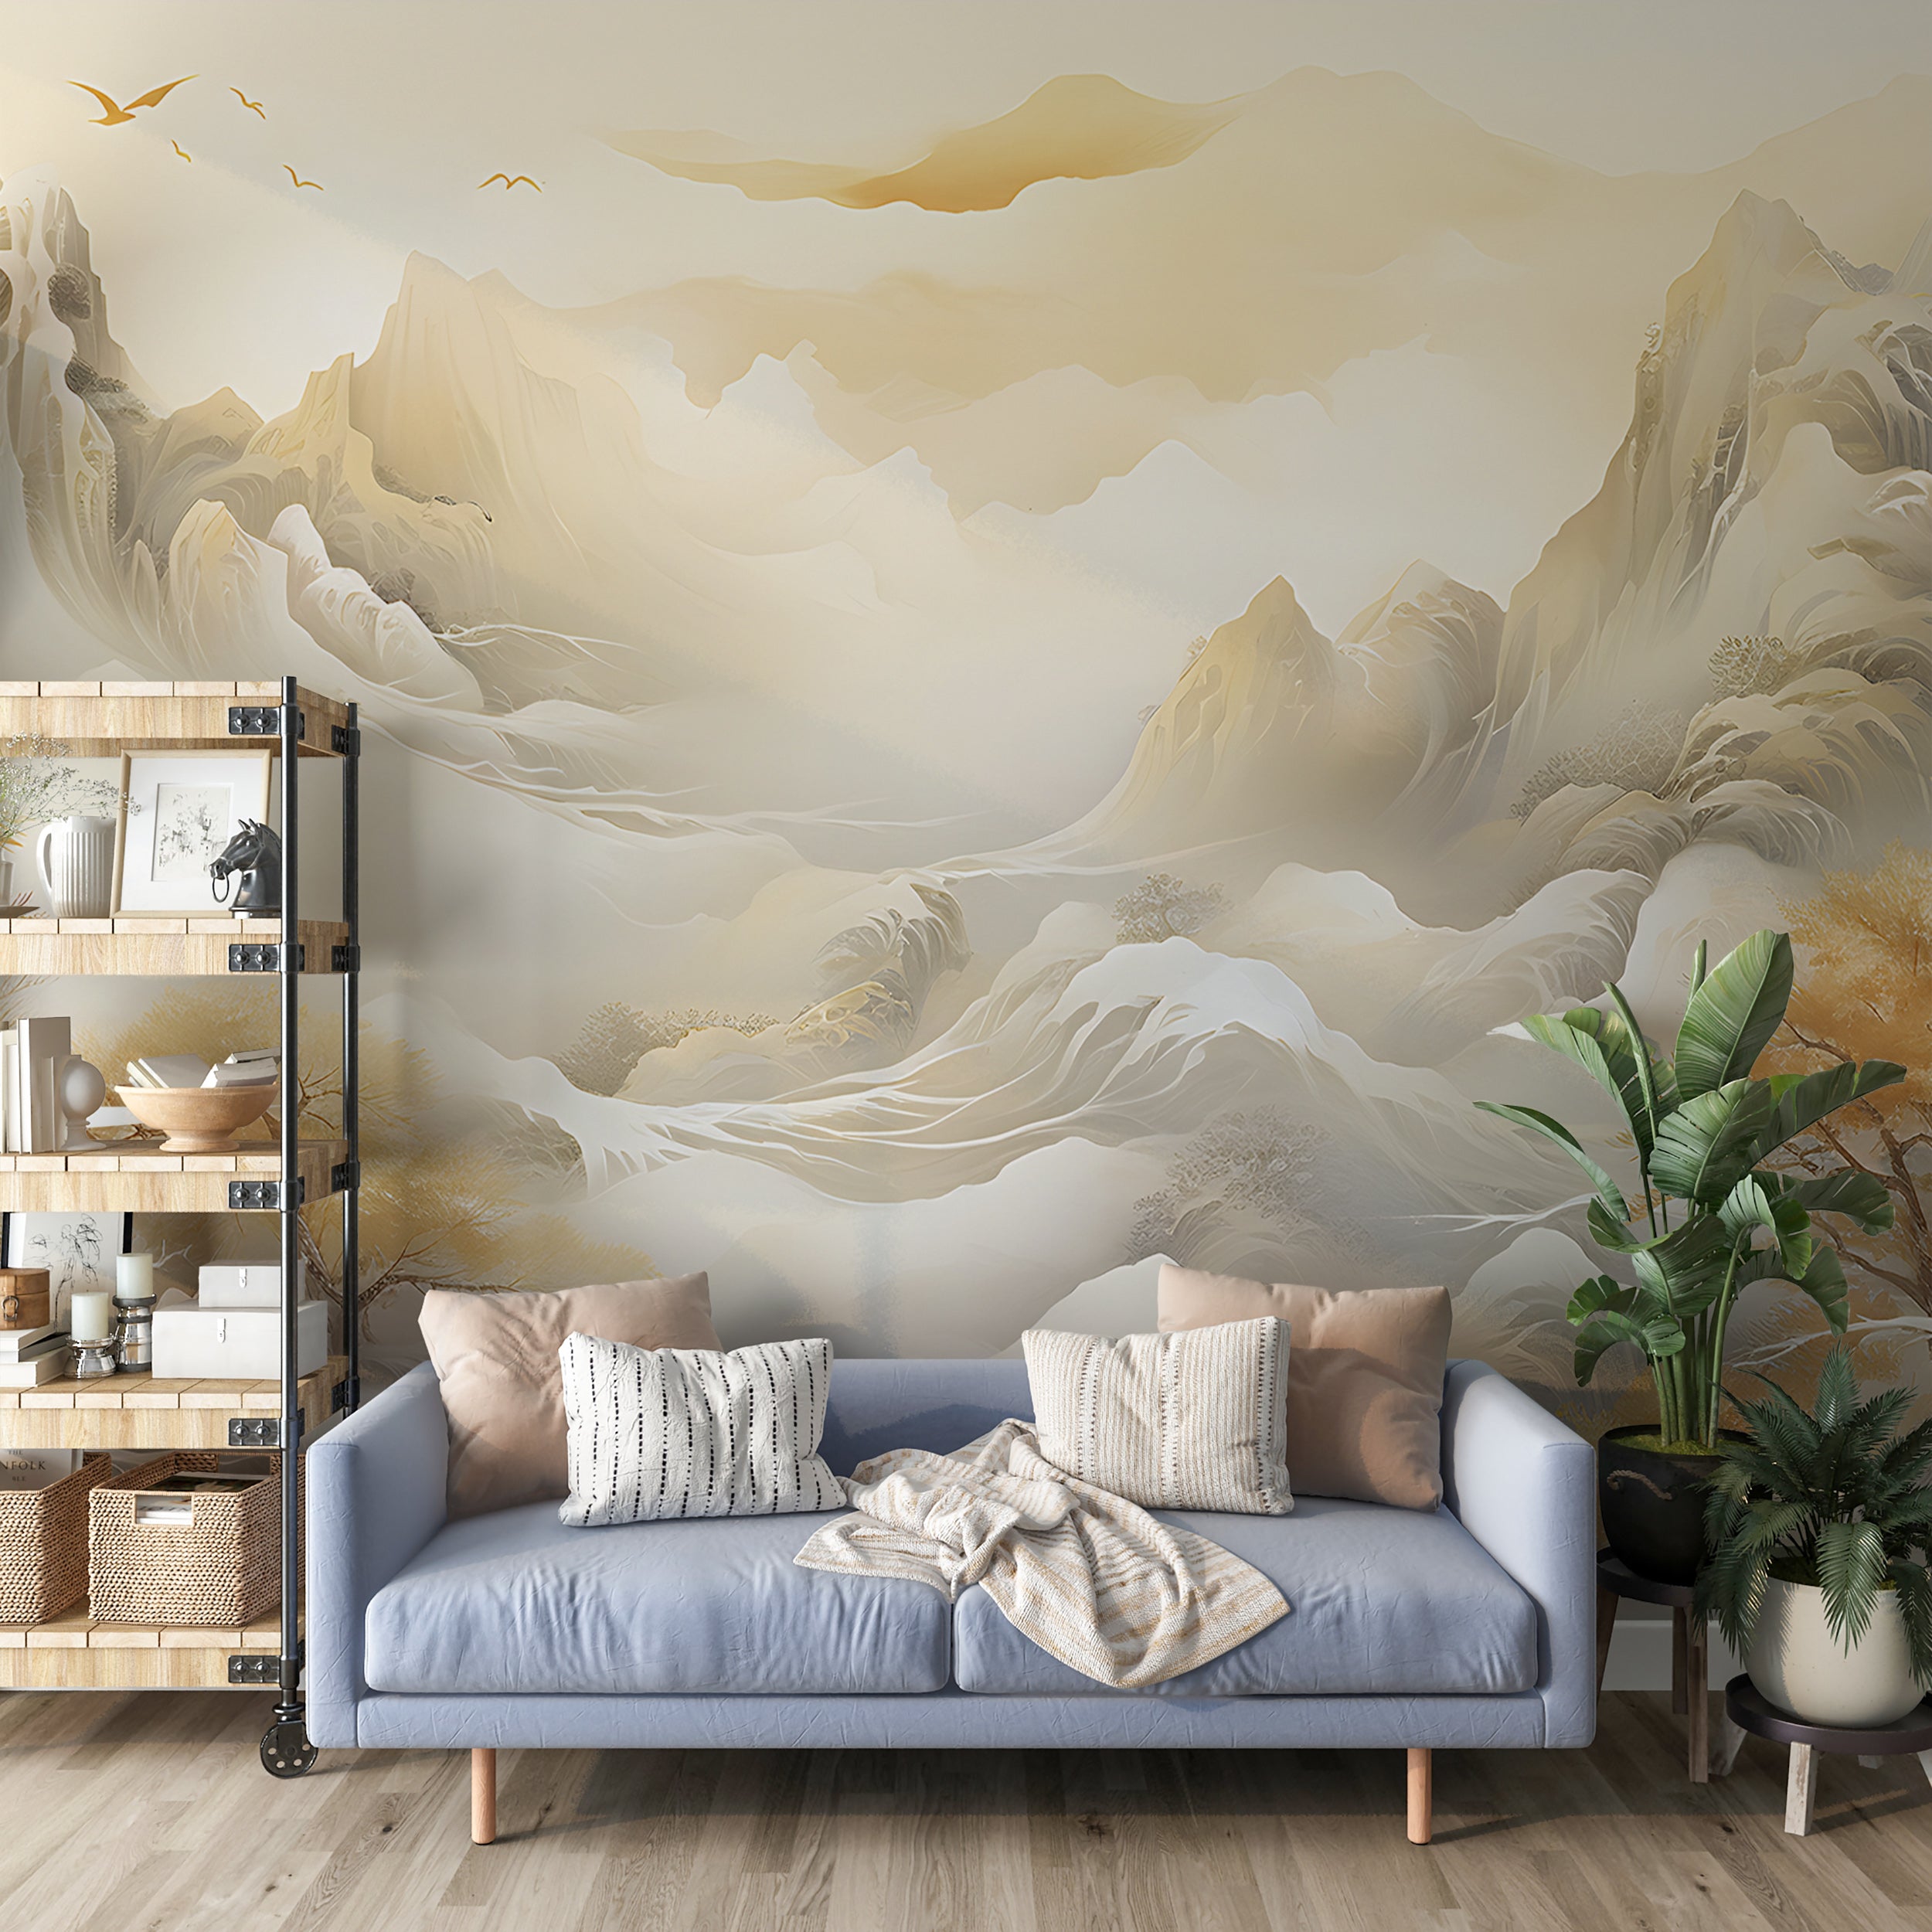 Peaceful Mountain Wall Covering